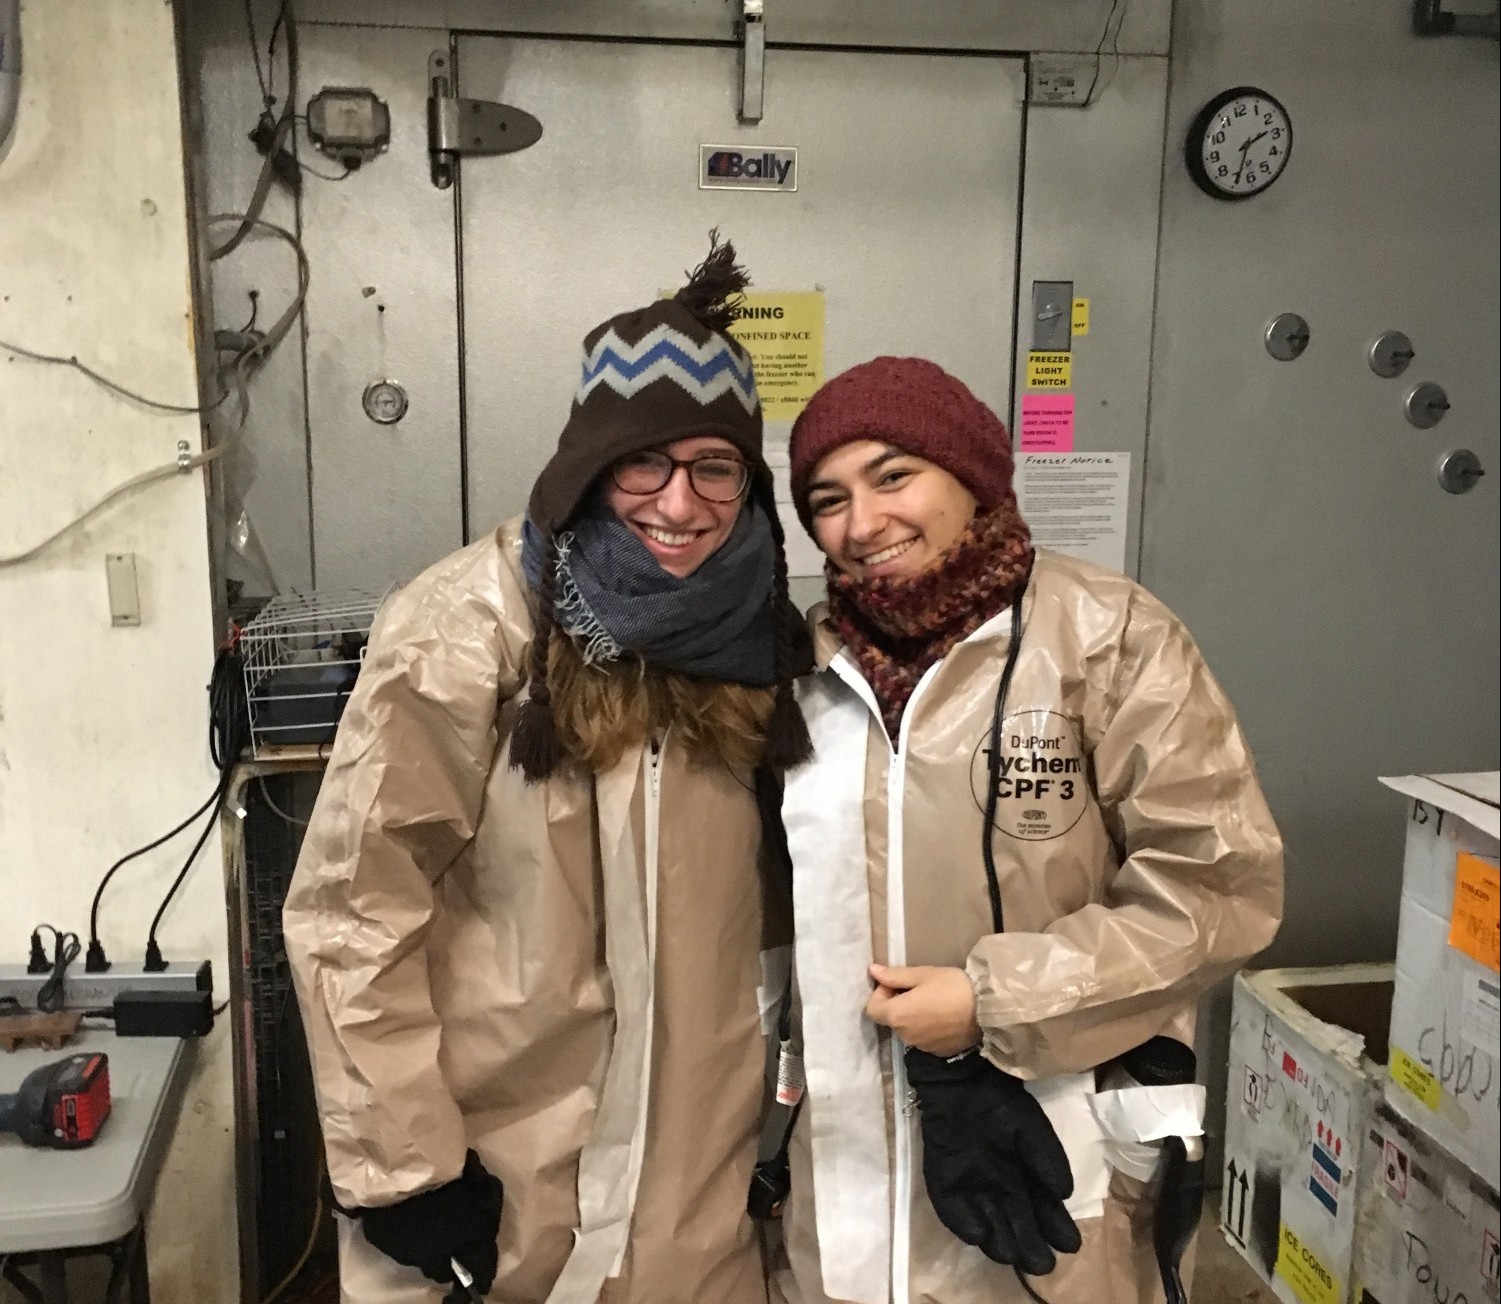 Visiting Brown undergrads Allie Coonin and Jessica Minker wear "warm suits" to make samples in the cold room (2018).